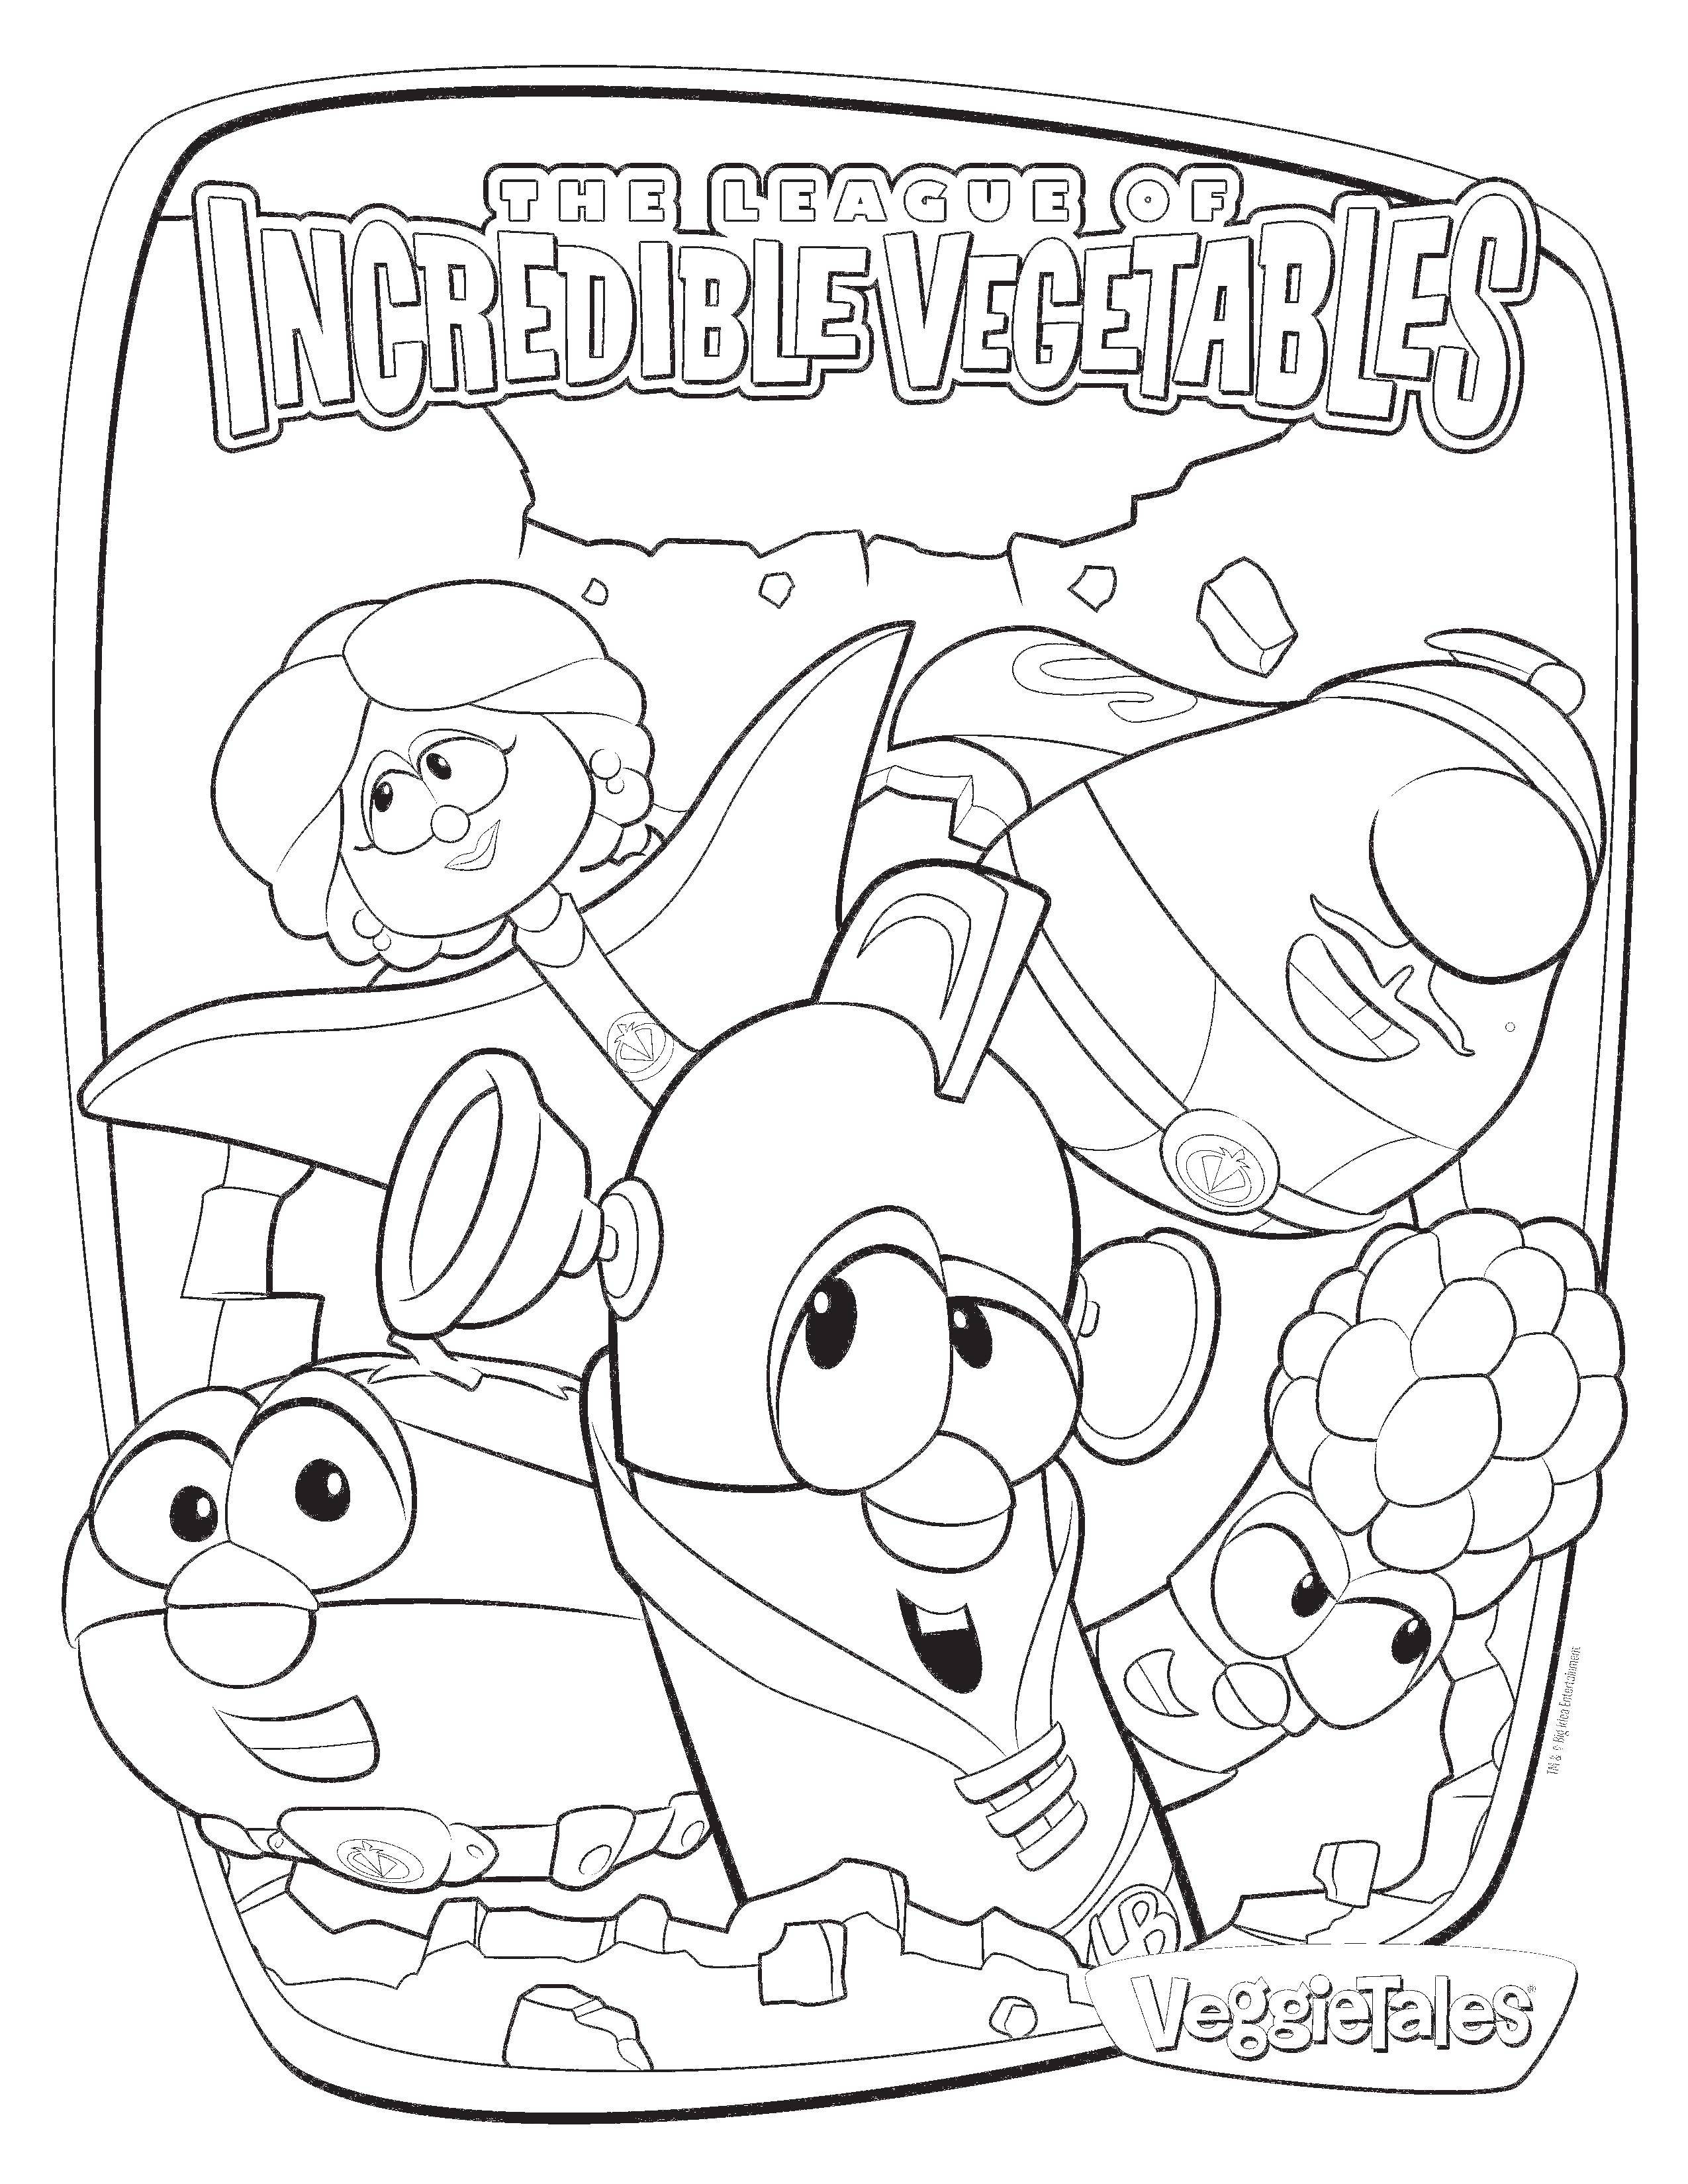 Coloring Incredible vegetables. Category cartoons. Tags:  vegetables, fruits.